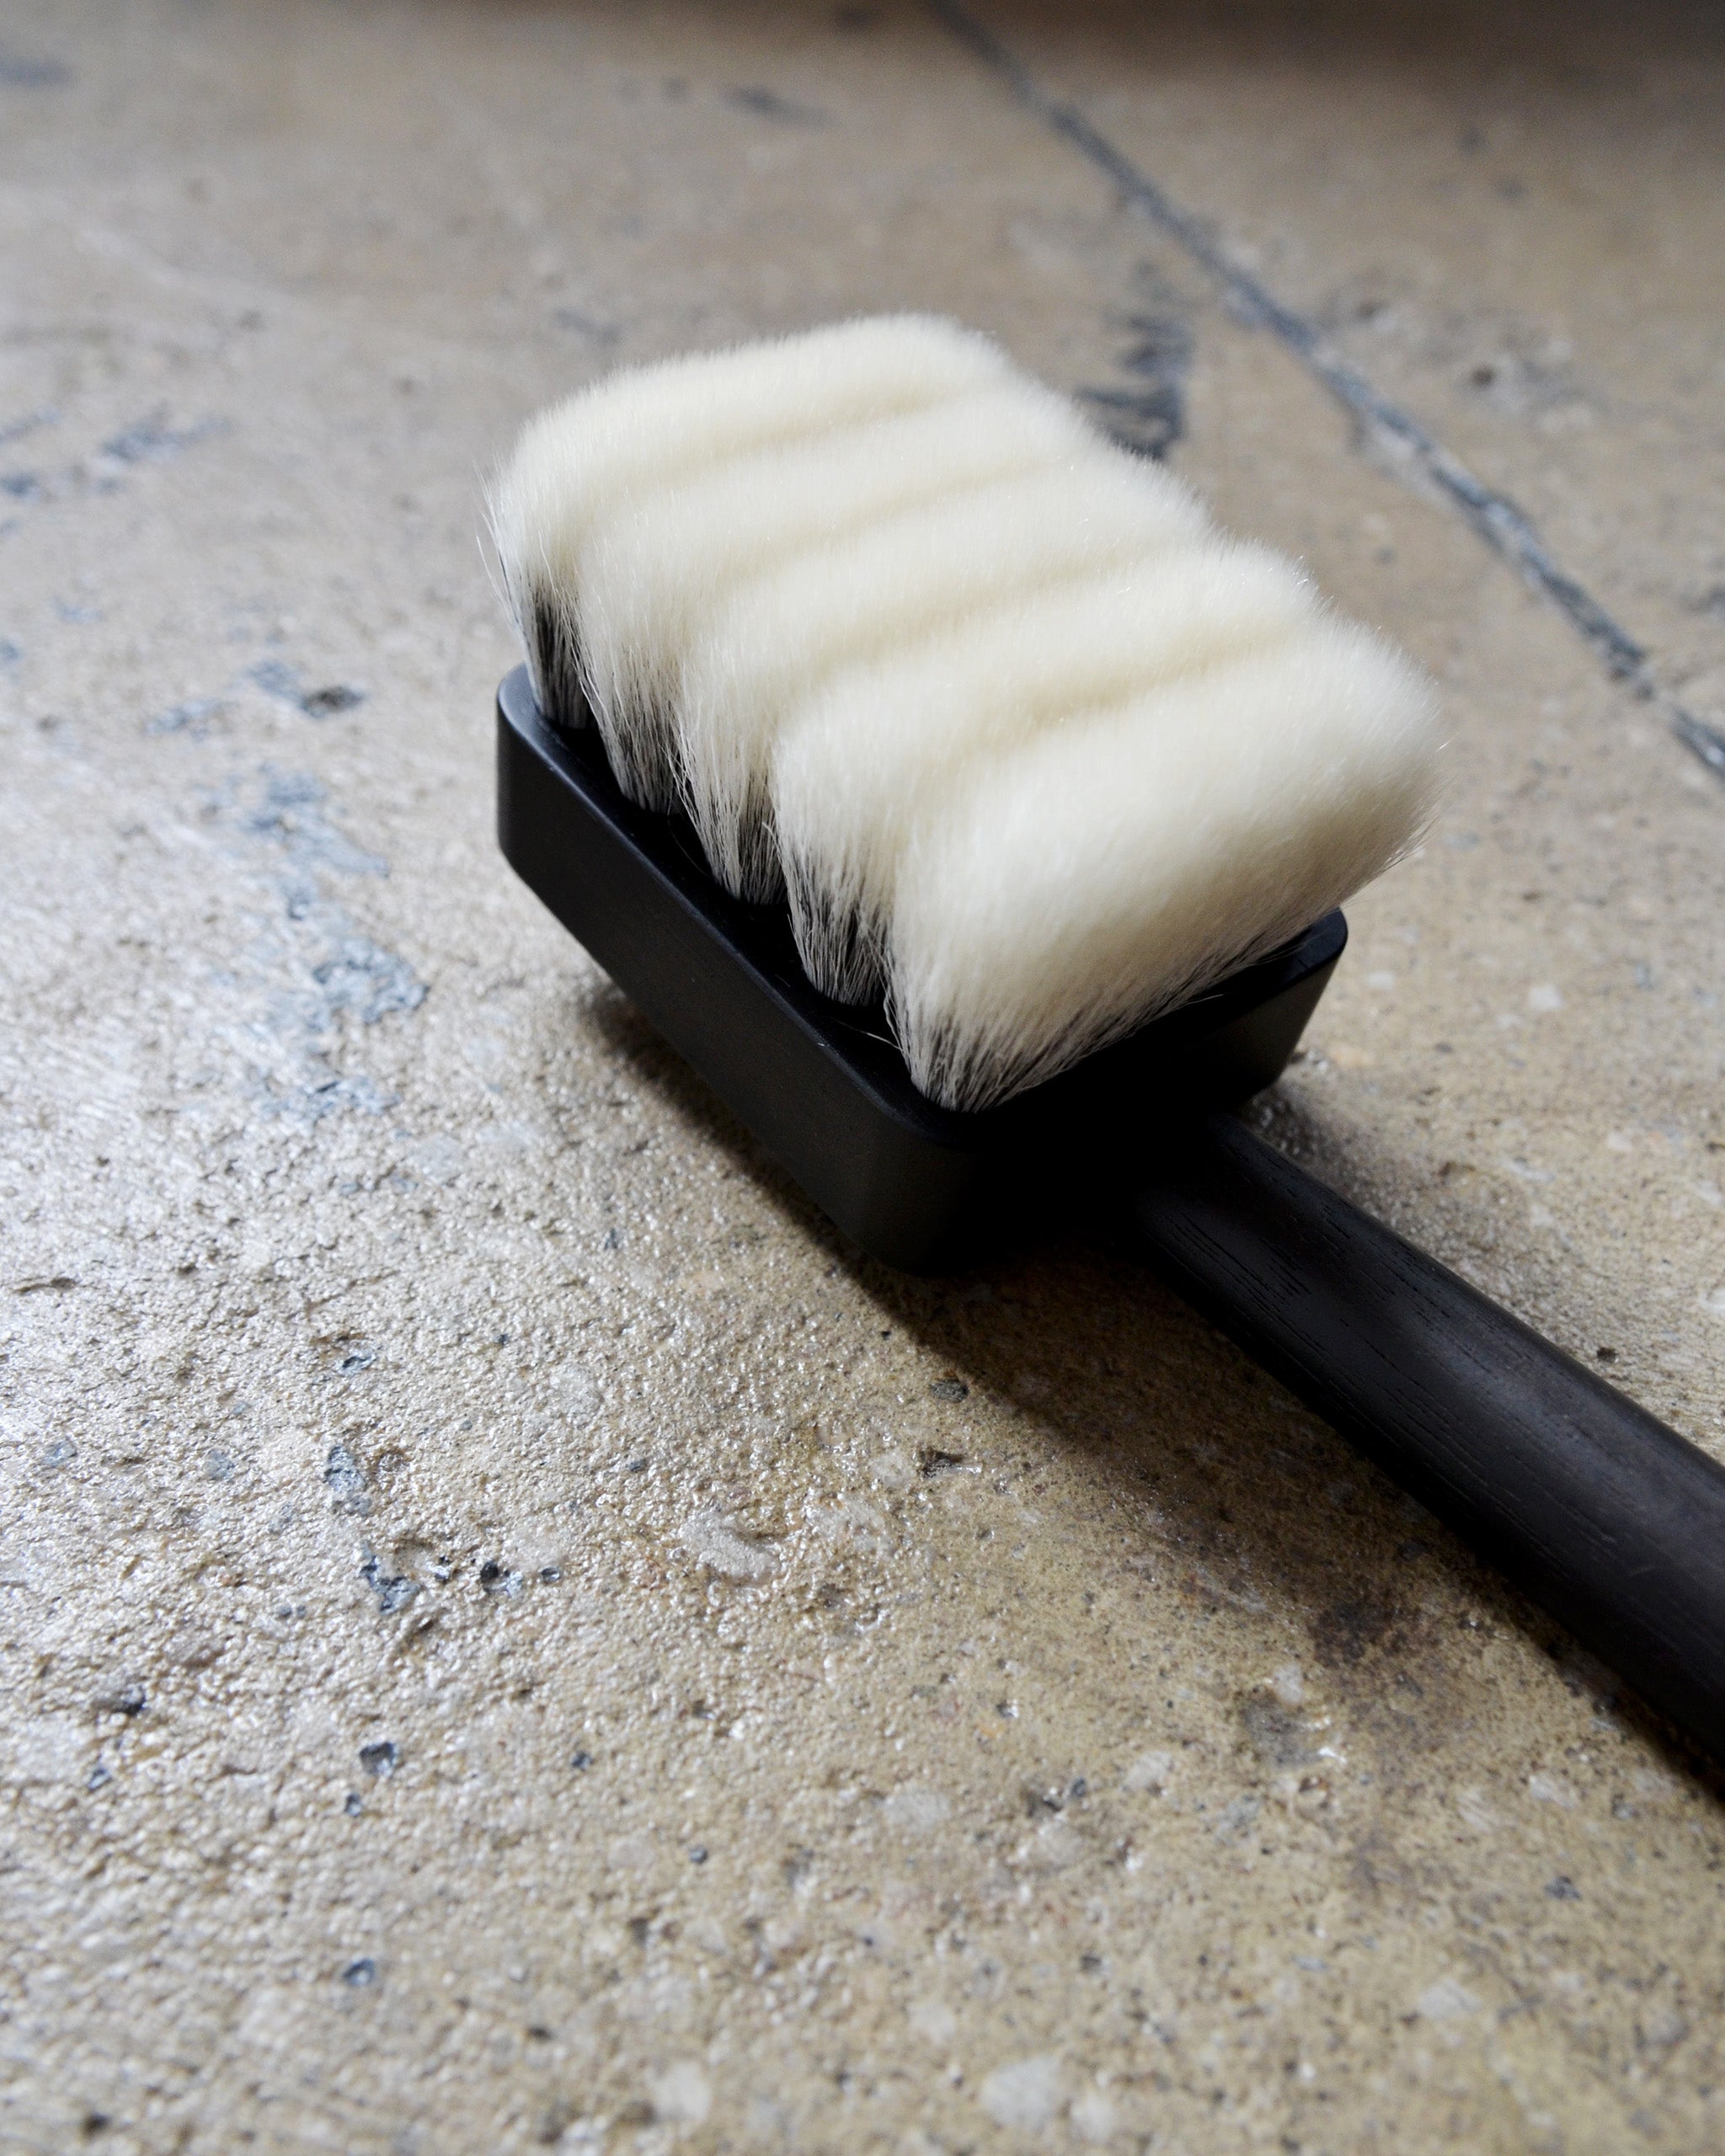 Close-up and cropped image of long jiva body brush with dark wood handle and light bristles by Shaquda against rough cement surface.